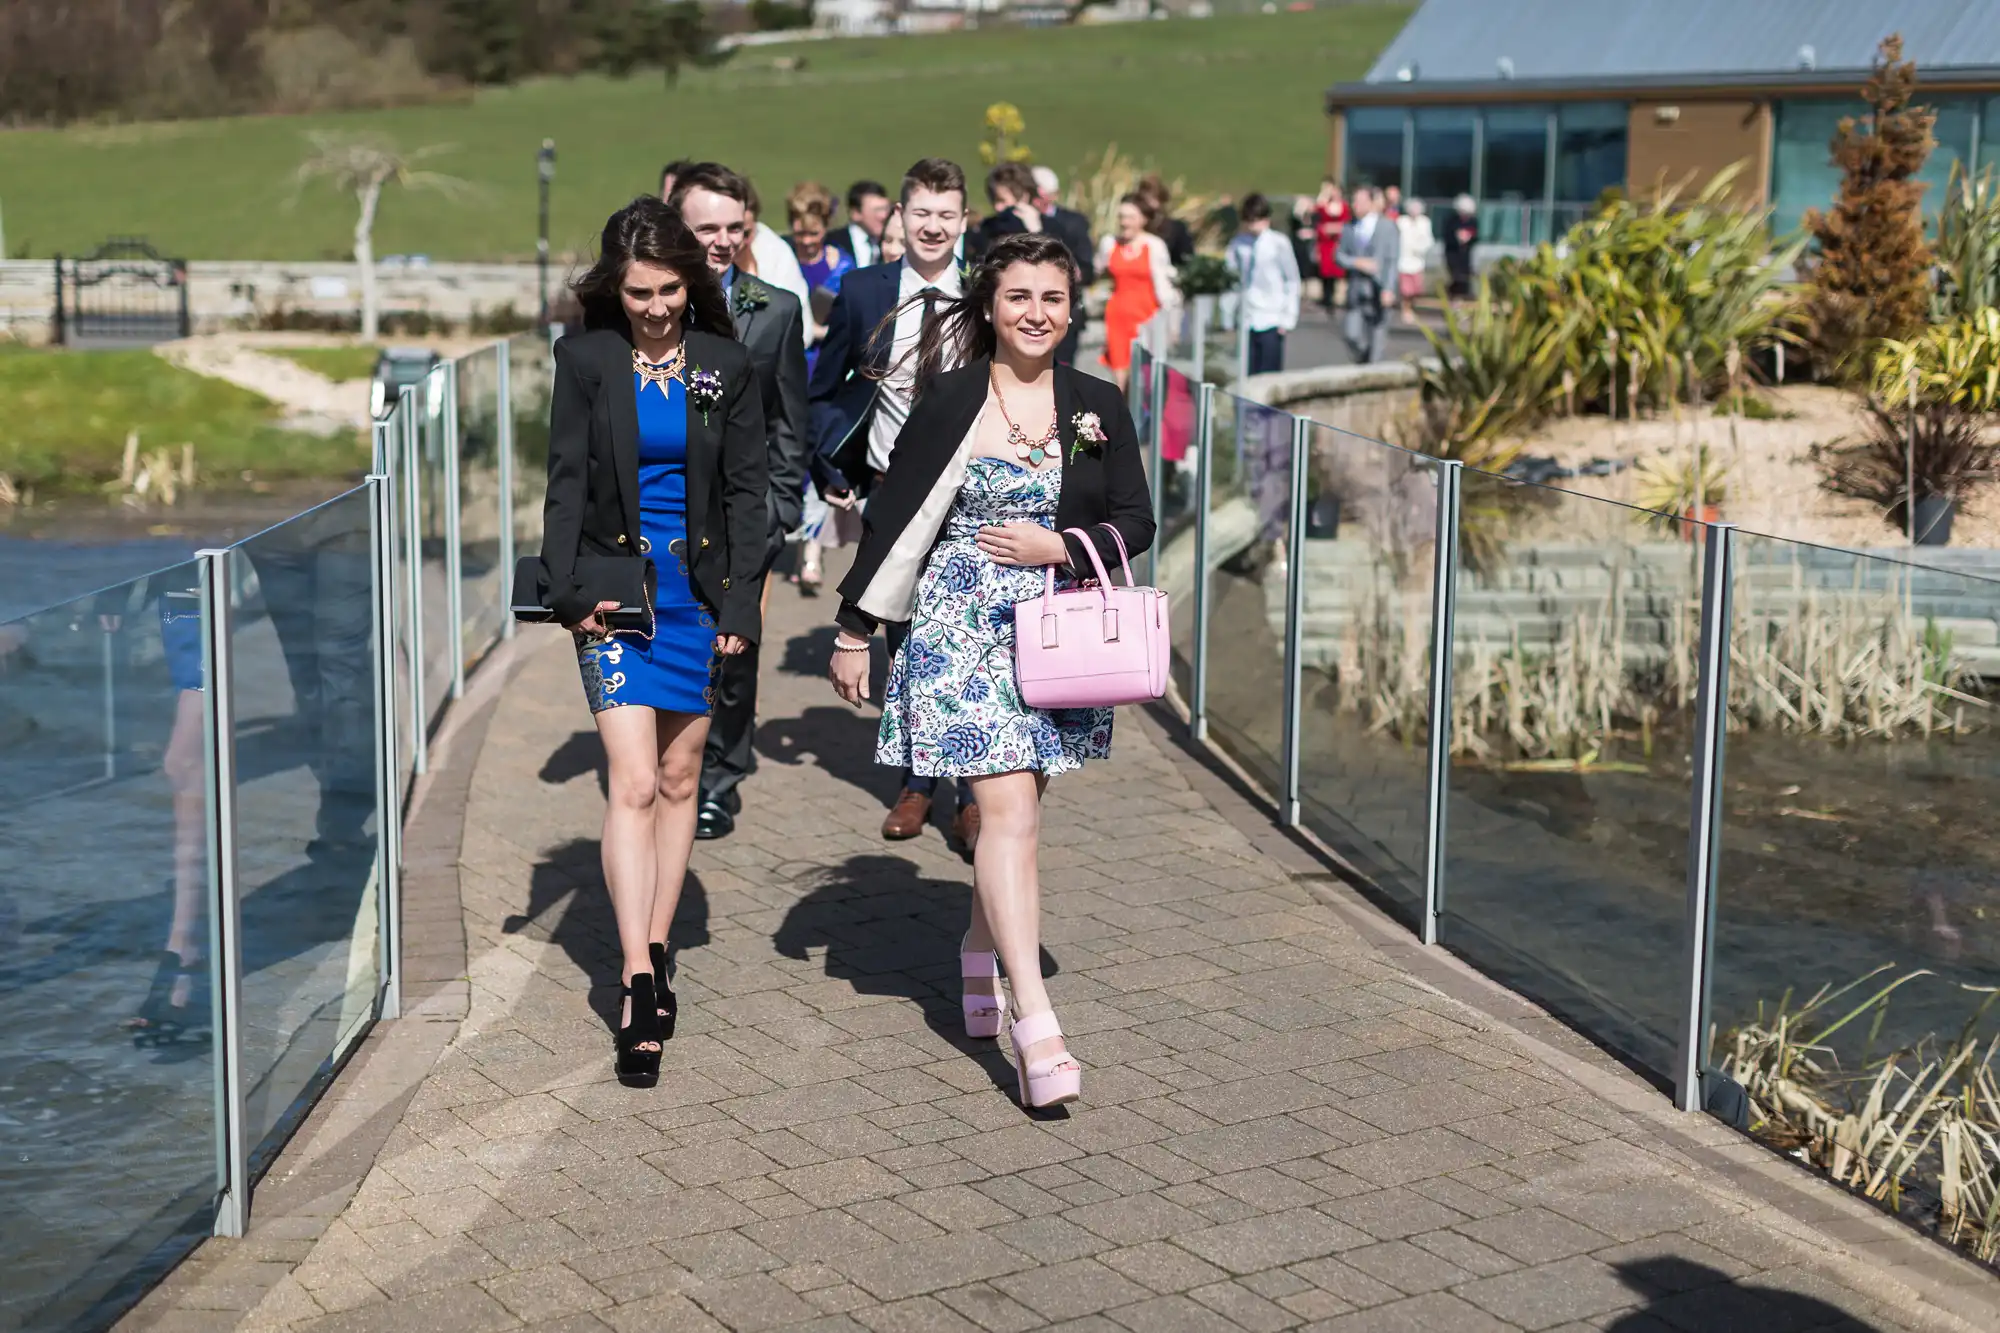 Group of people dressed in formal attire walking along a pathway at an outdoor event, with smiles and enjoying sunny weather.